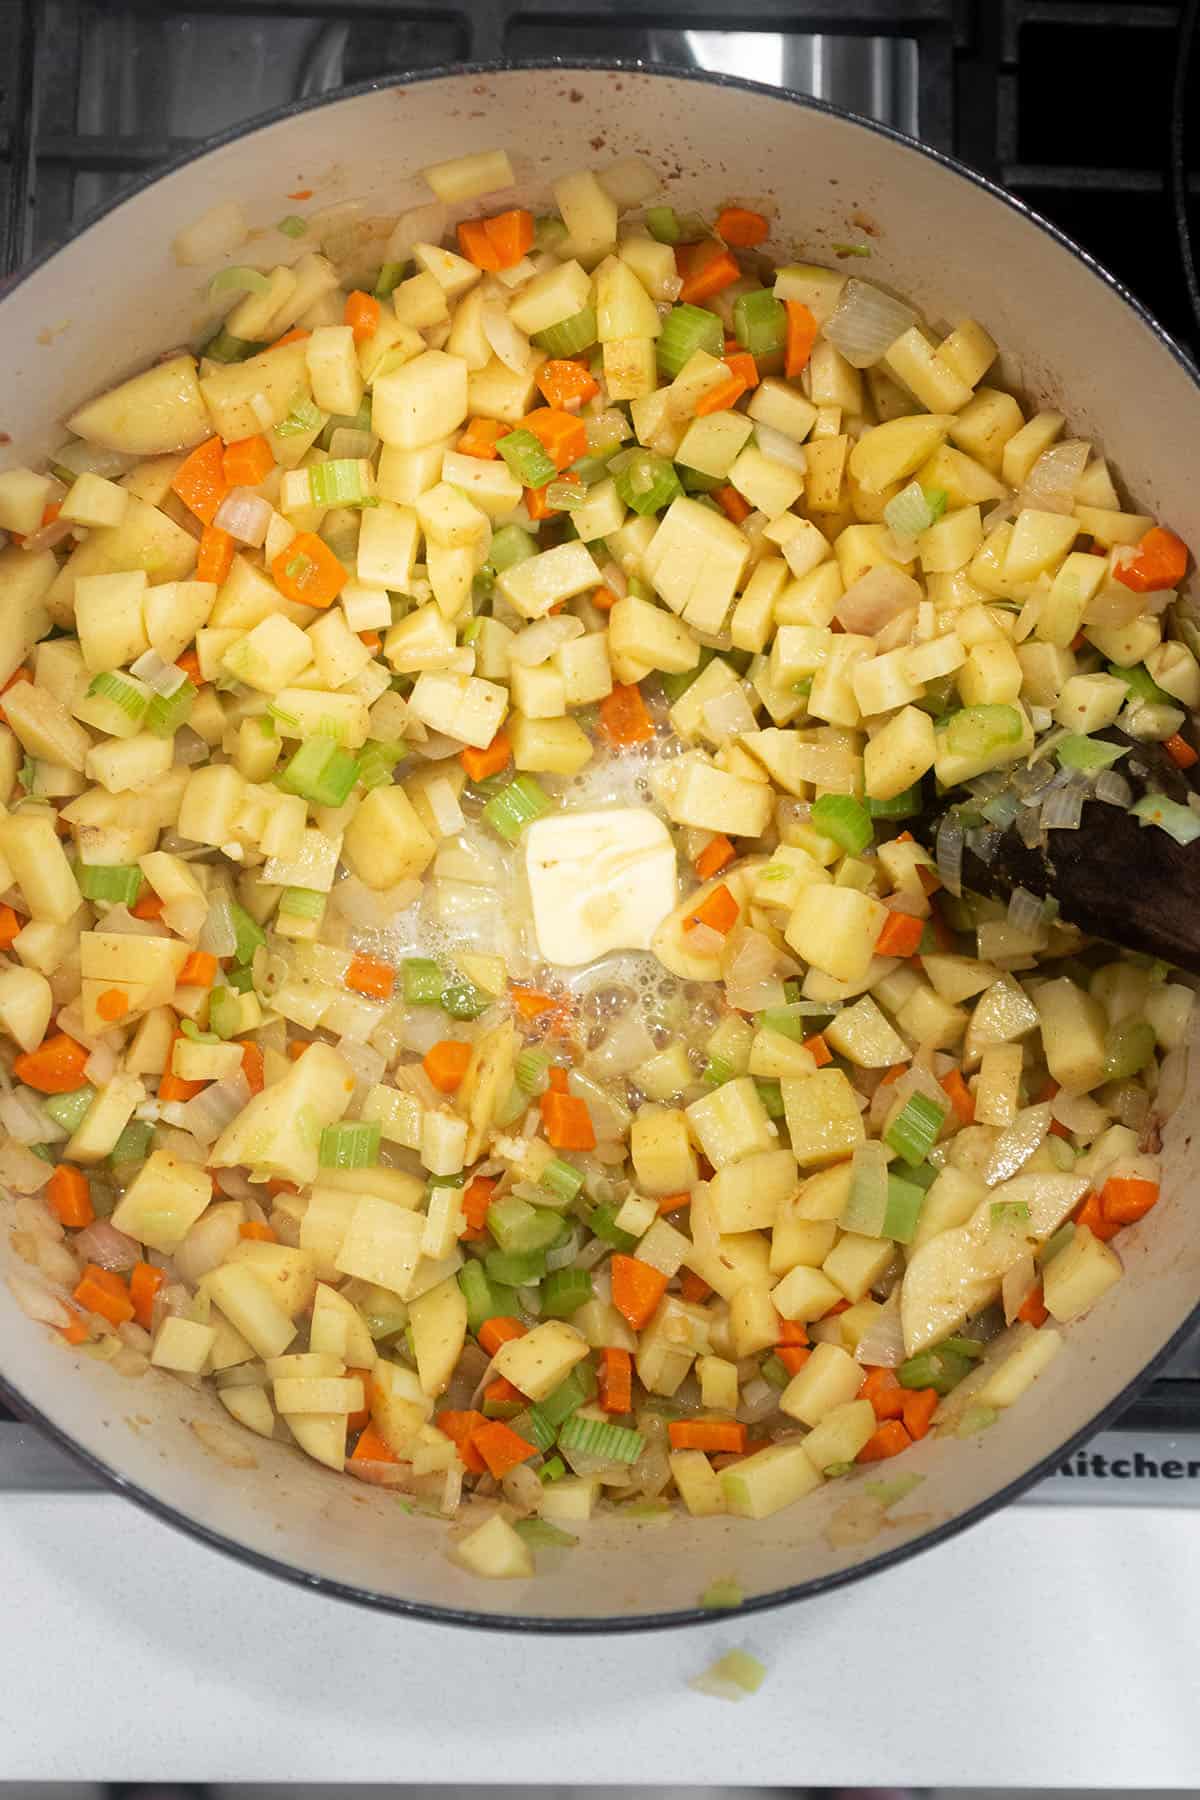 Large Dutch Oven with veggies sautéing and butter being melted.